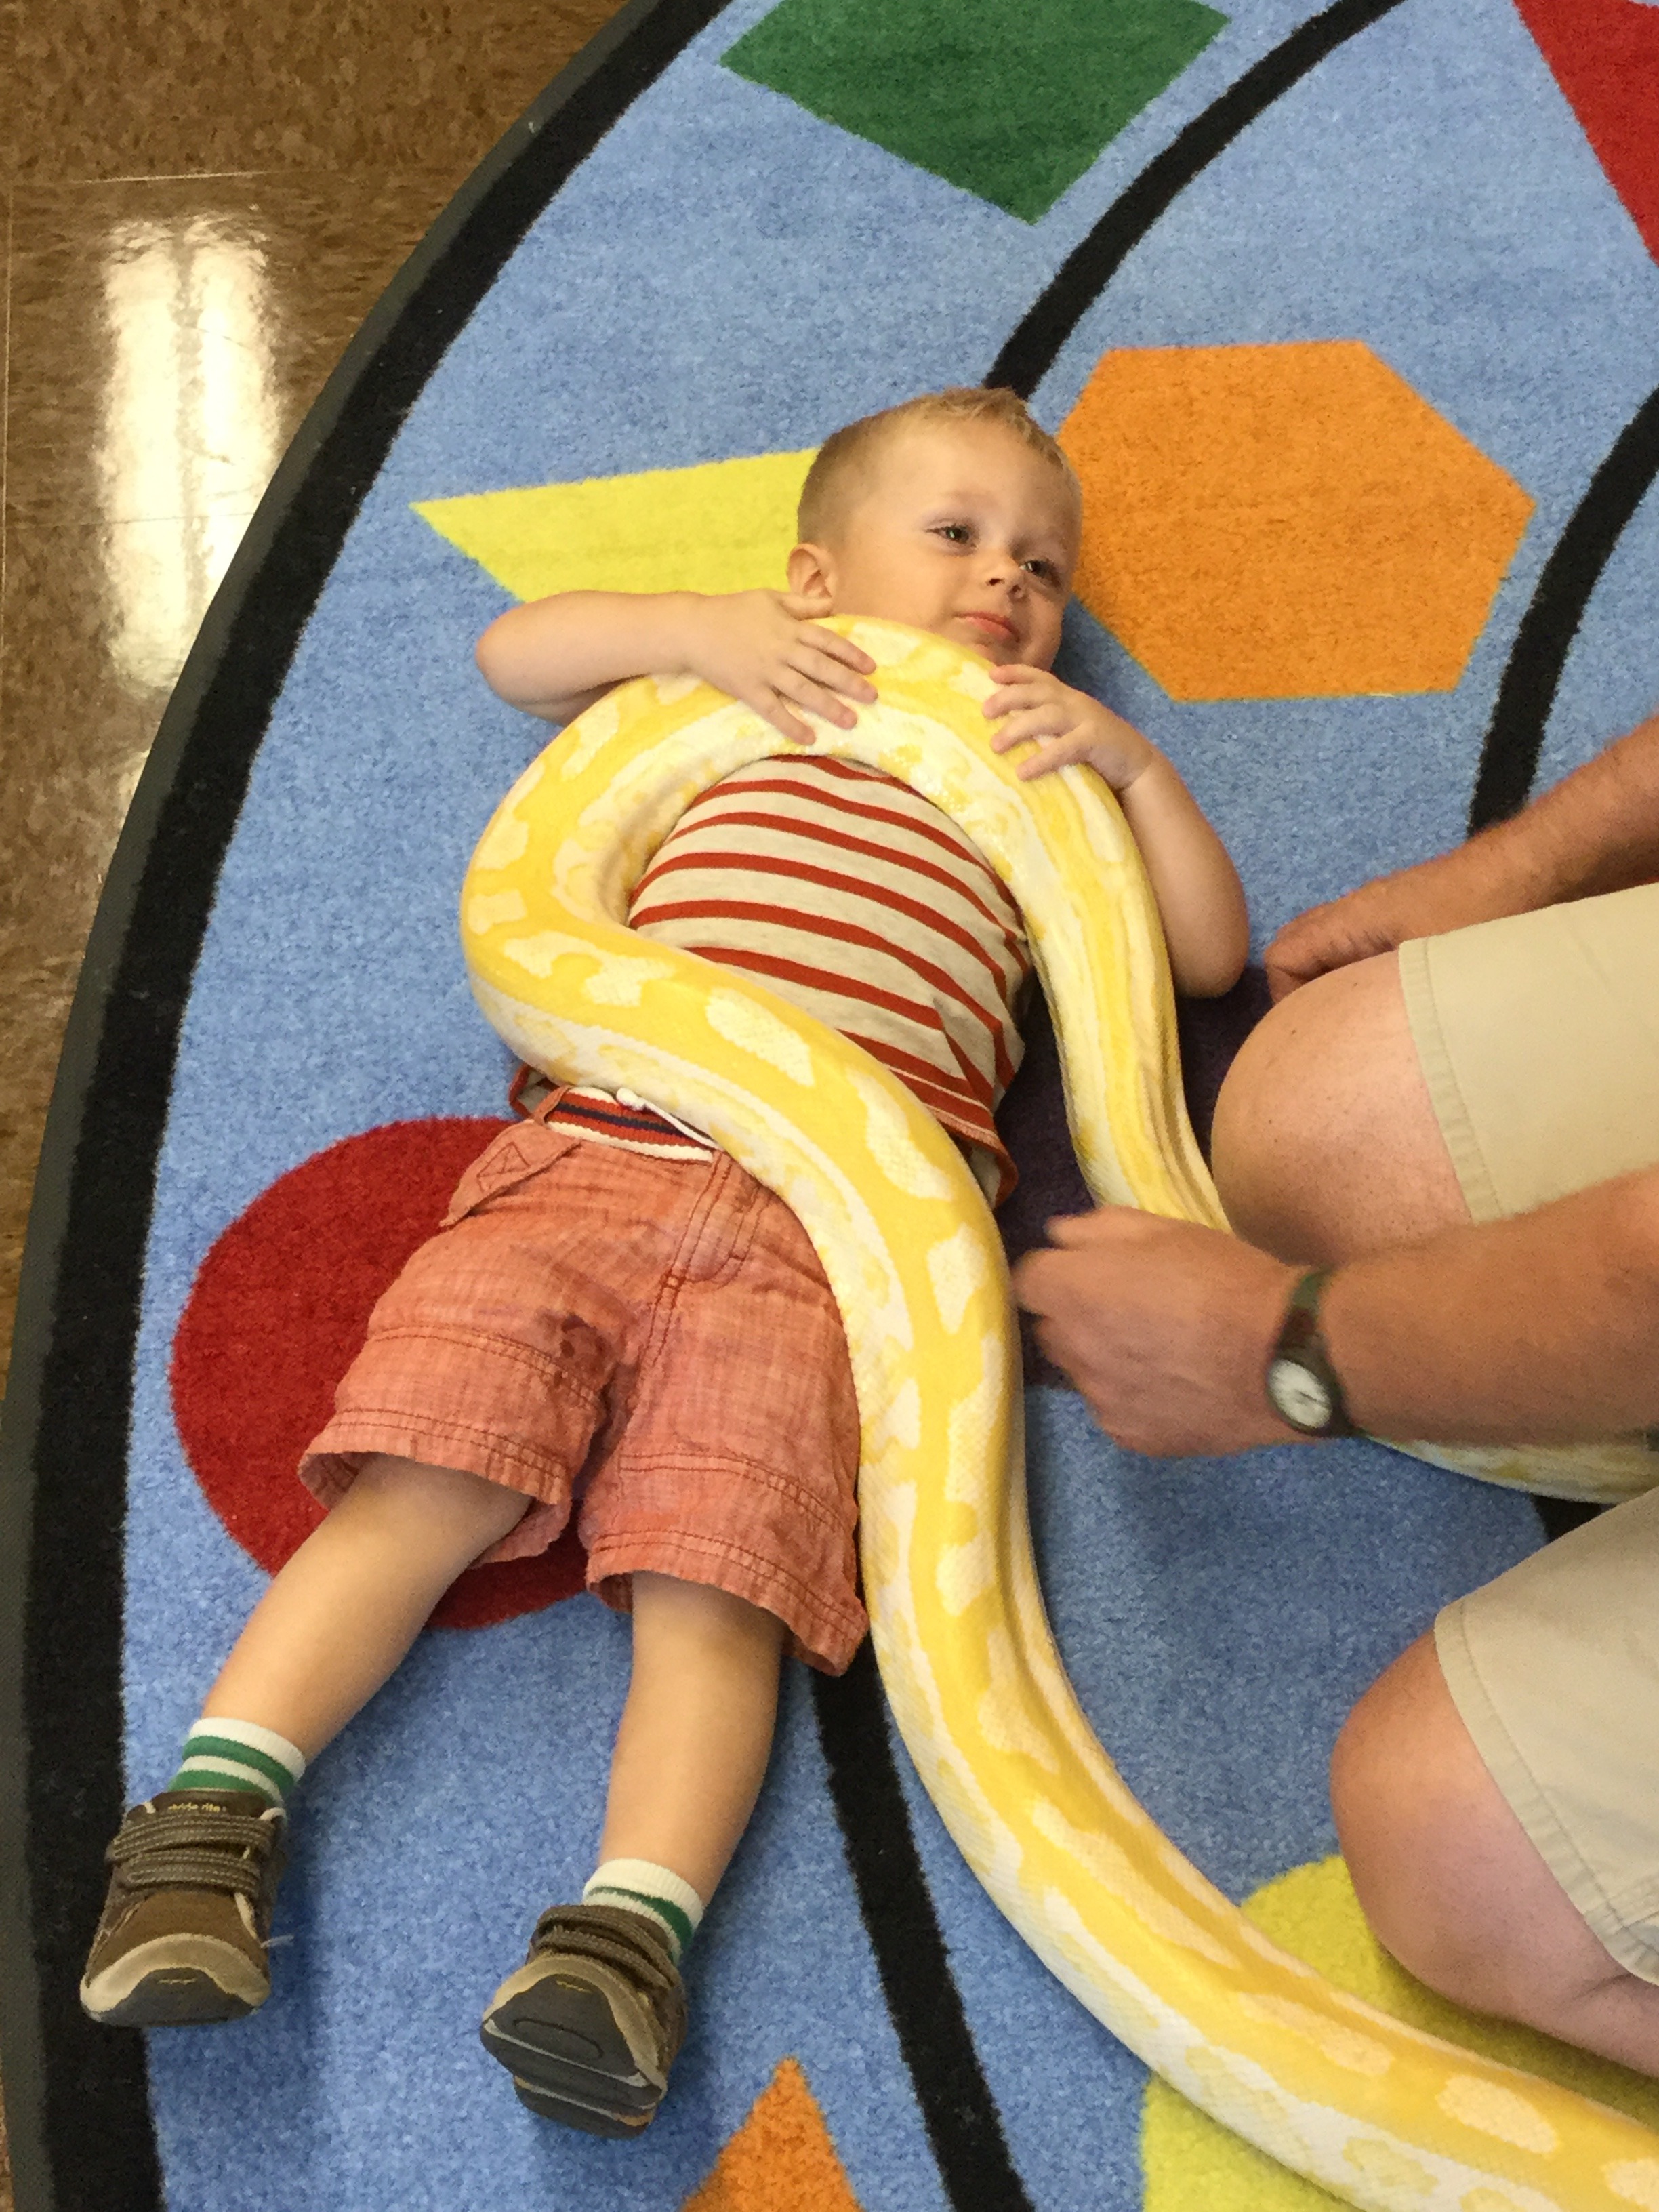 Little boy lies on the floor happily as a trained animal expert supervises the Burmese python placed on him